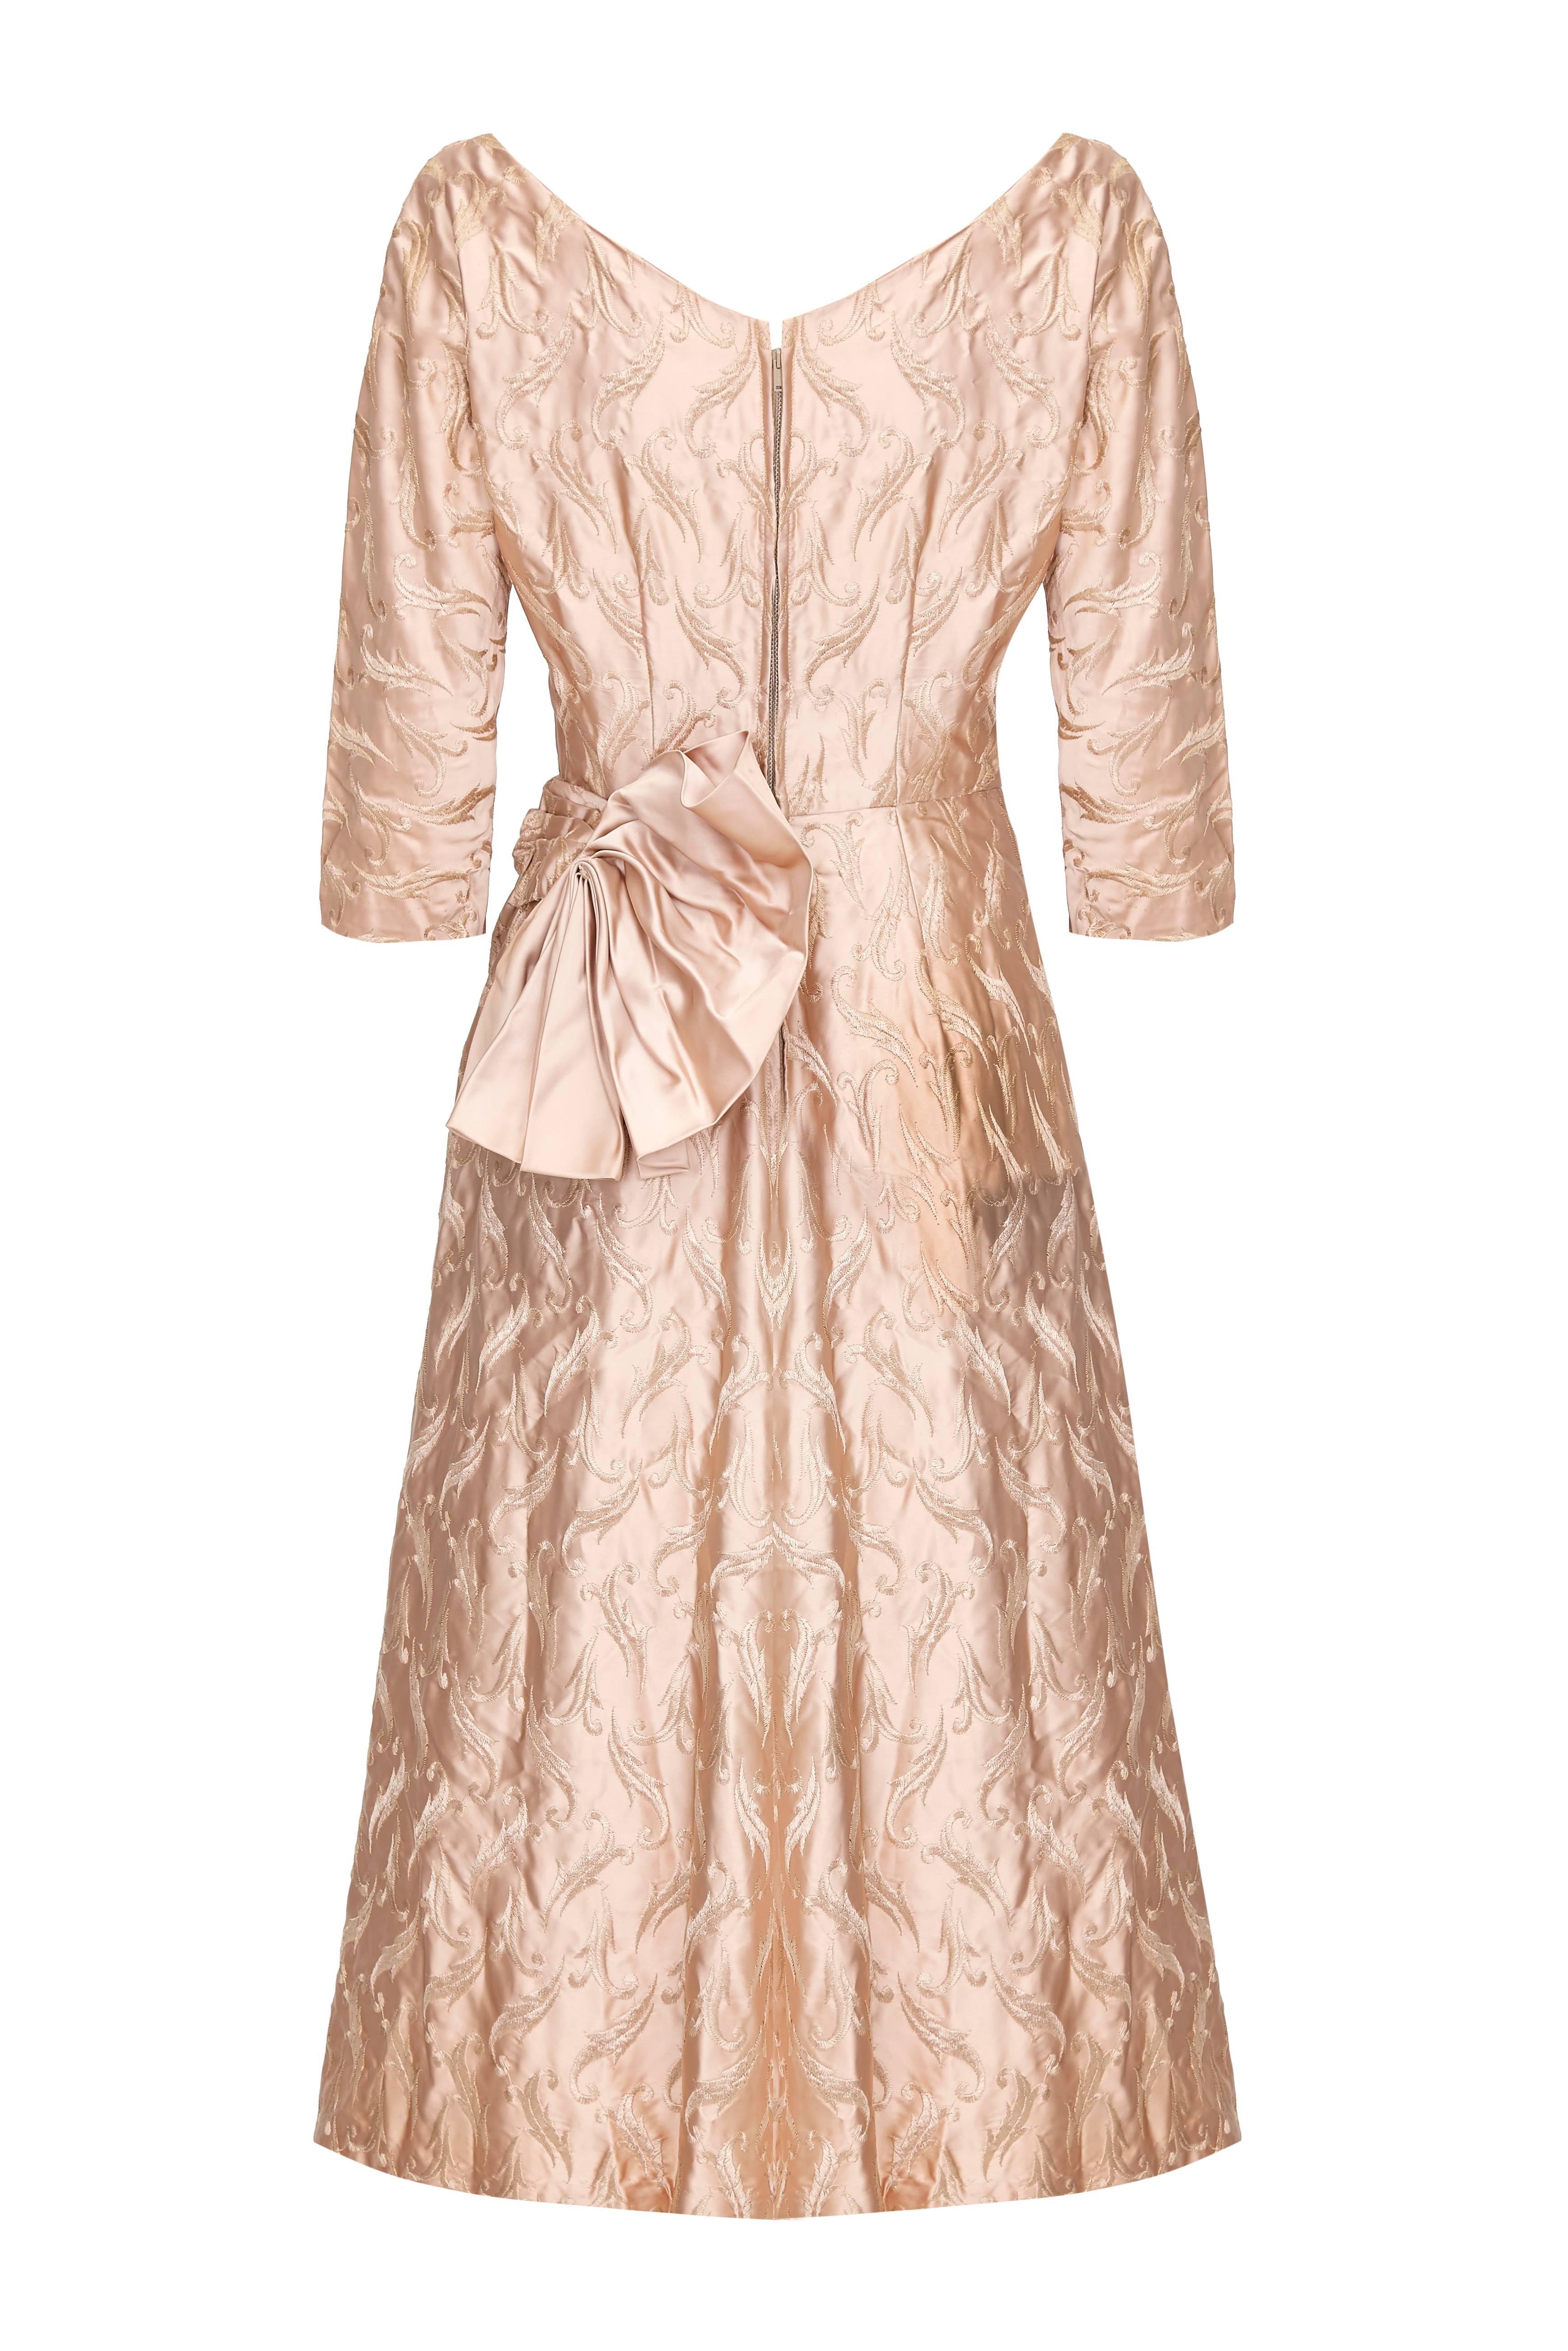 Beautiful vintage 1950s American dress in antique rose gold silk with embroidery.  This lovely piece features ¾ sleeves, net inside the skirt for extra volume, a pleated bow and zip fastening at the back. It is in excellent condition with no